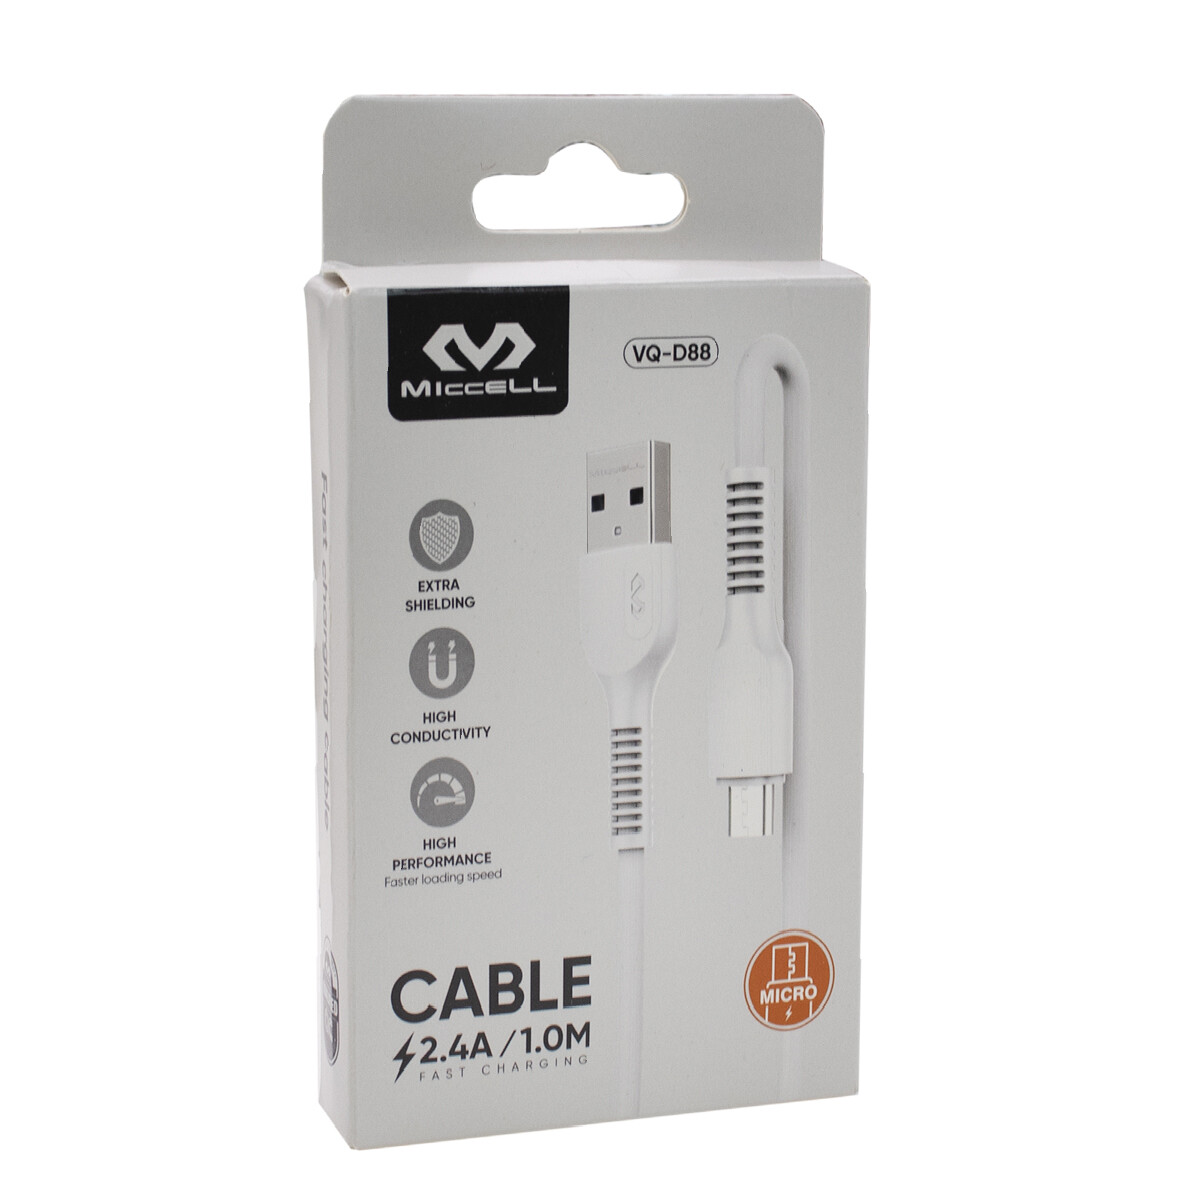 Cable Micro Usb Miccell 2.4a 1.0m Blanco 